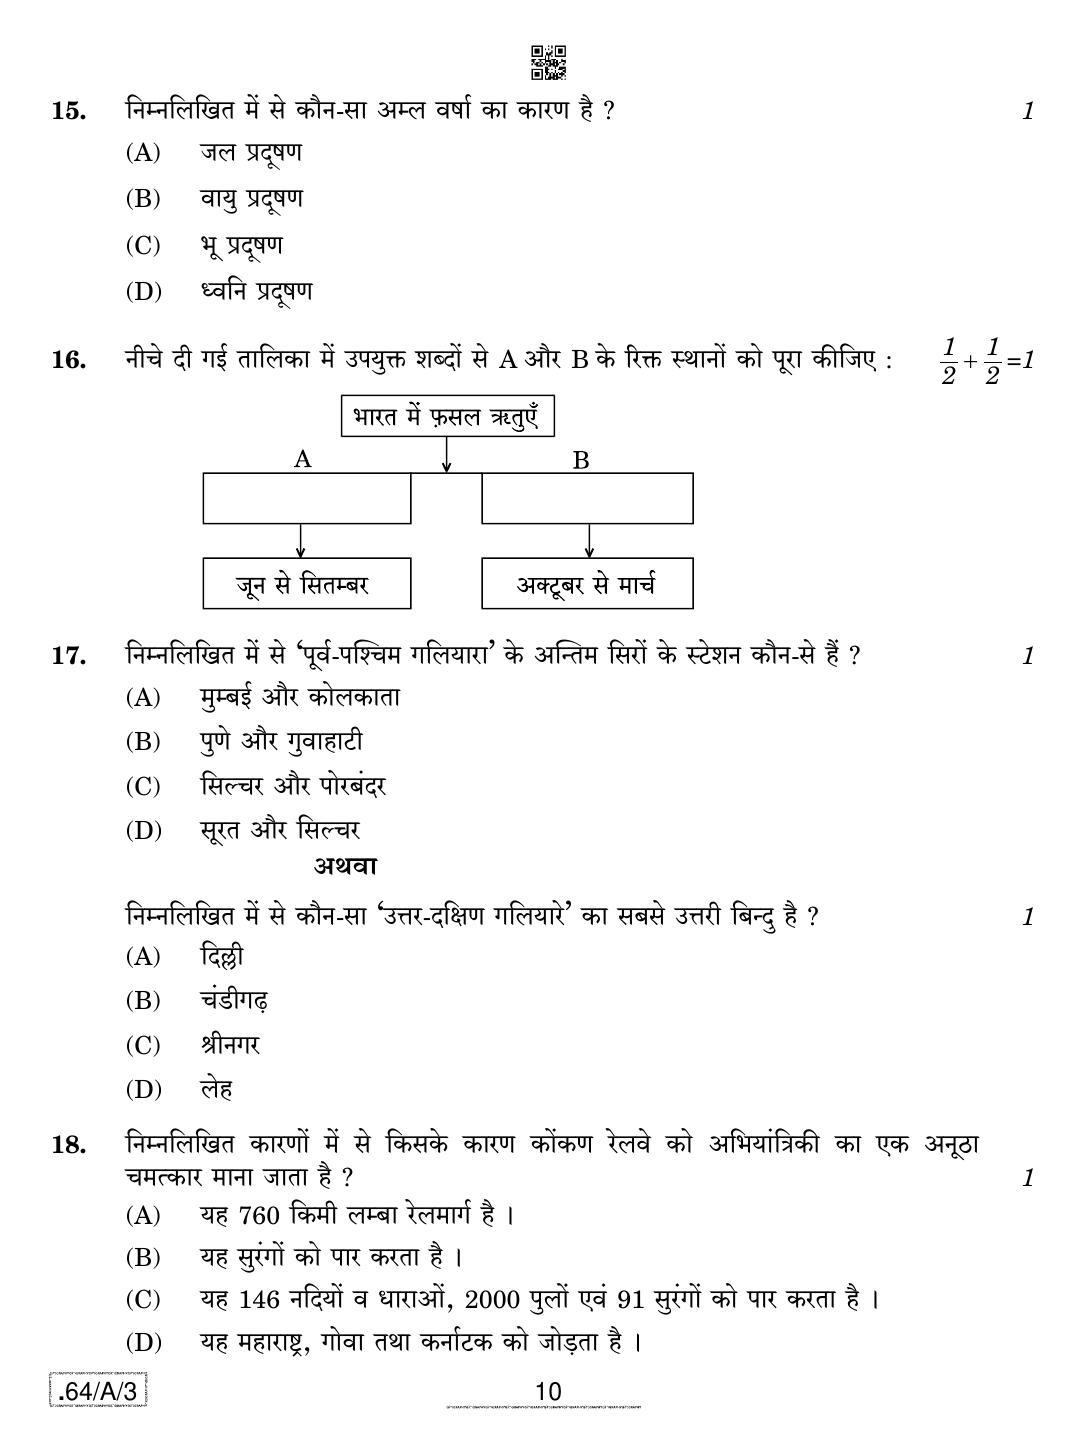 CBSE Class 12 64-C-3 - Geography 2020 Compartment Question Paper - Page 10